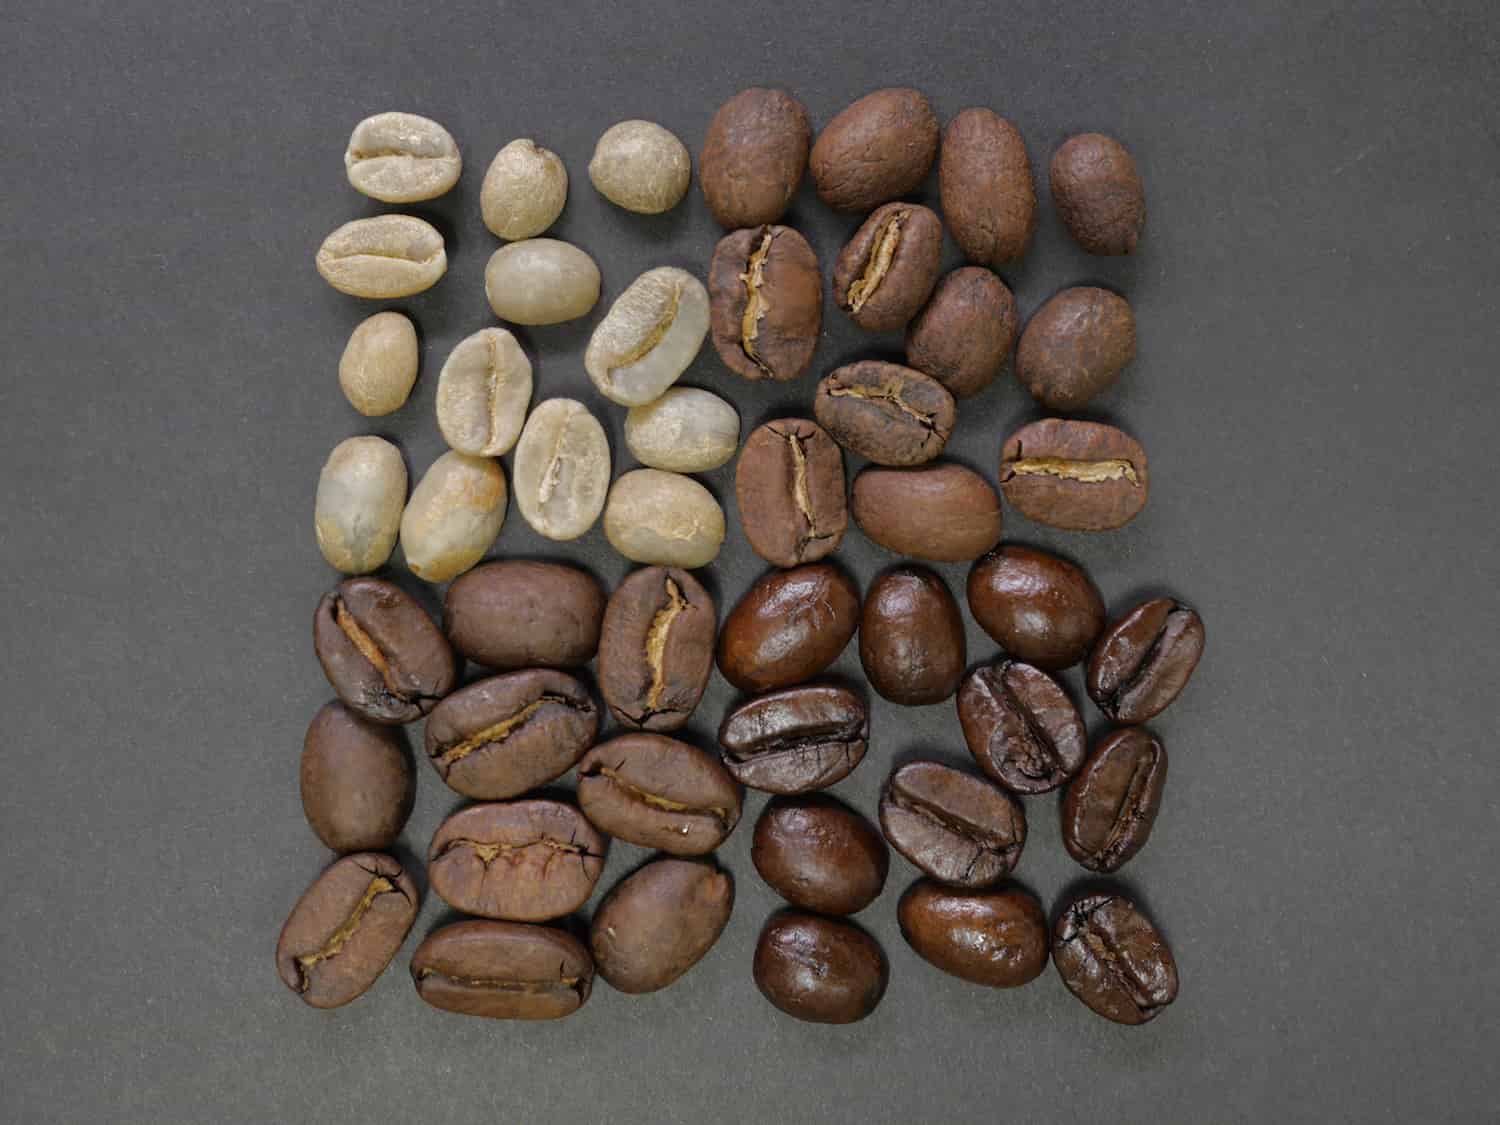 An In-depth Guide to the Profiles in the Coffee Explorer Kit